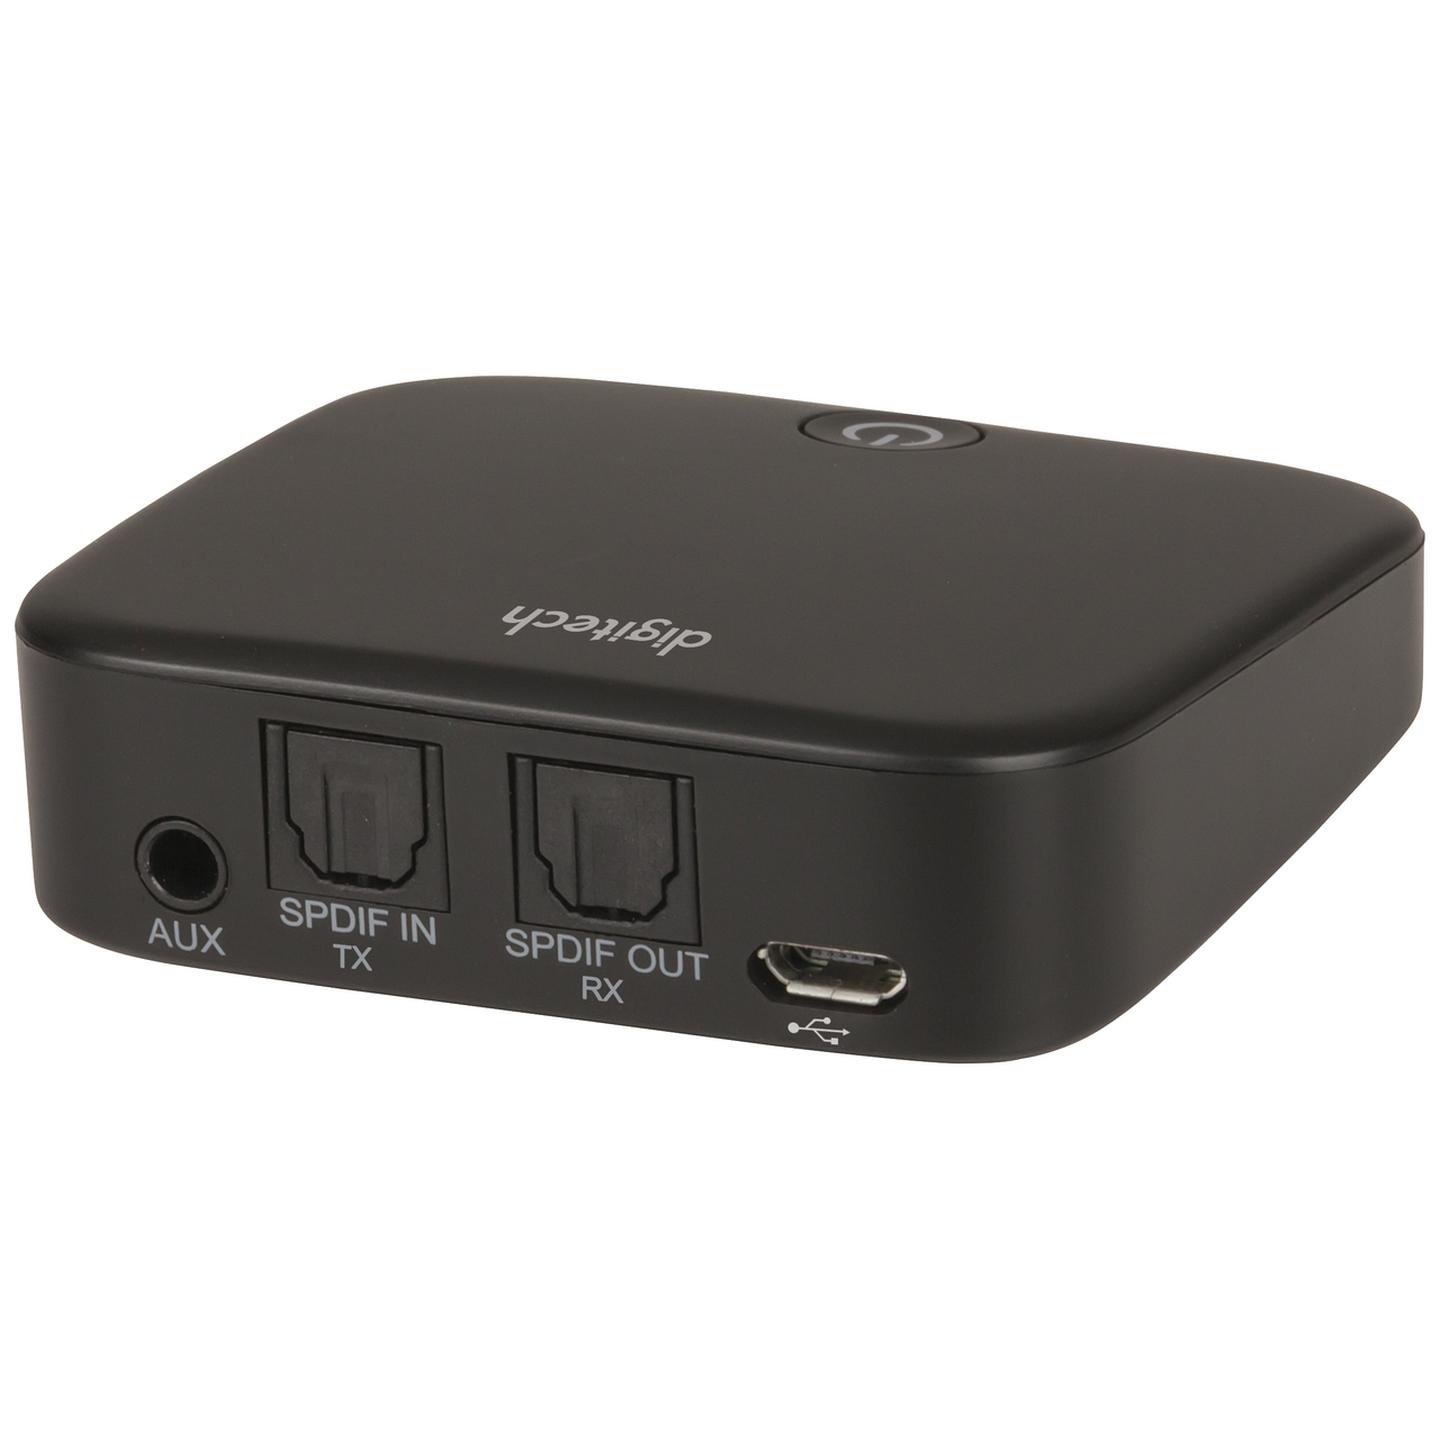 Digitech Bluetooth 5.0 Audio Transmitter and Receiver with Optical Output